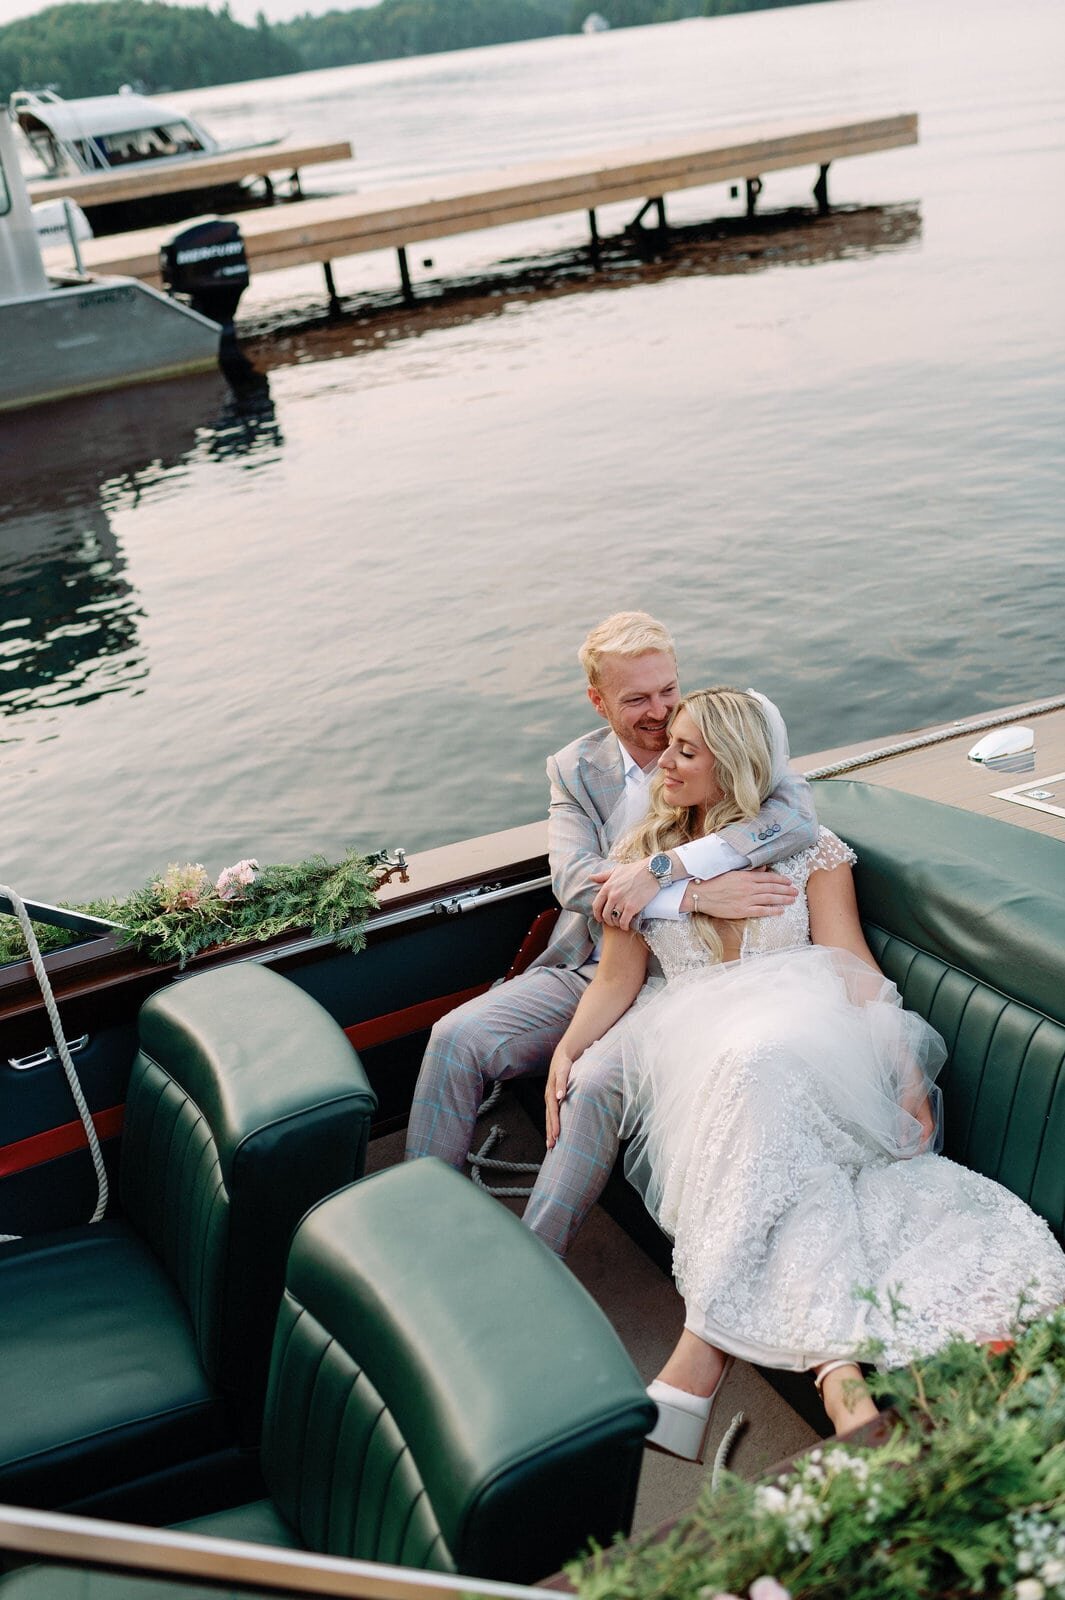 Bride and Groom Editorial Portrait on Luxury Wooden Boat Muskoka Lakes Golf and Country Resort Wedding Jacqueline James Photography